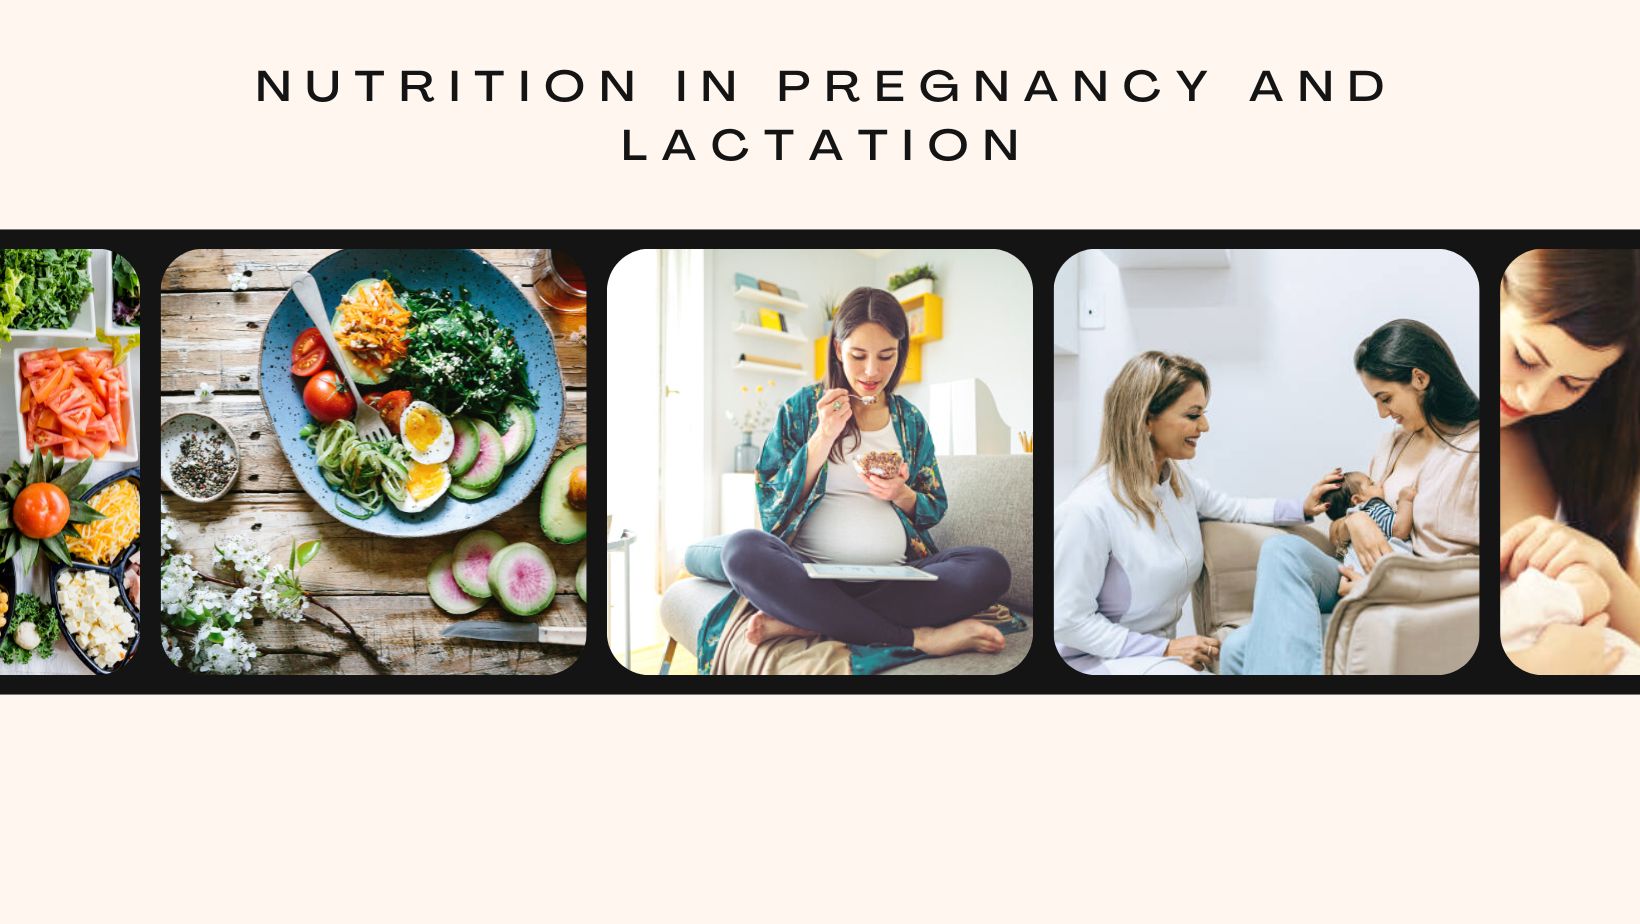 nutritional requirements in pregnancy and lactation